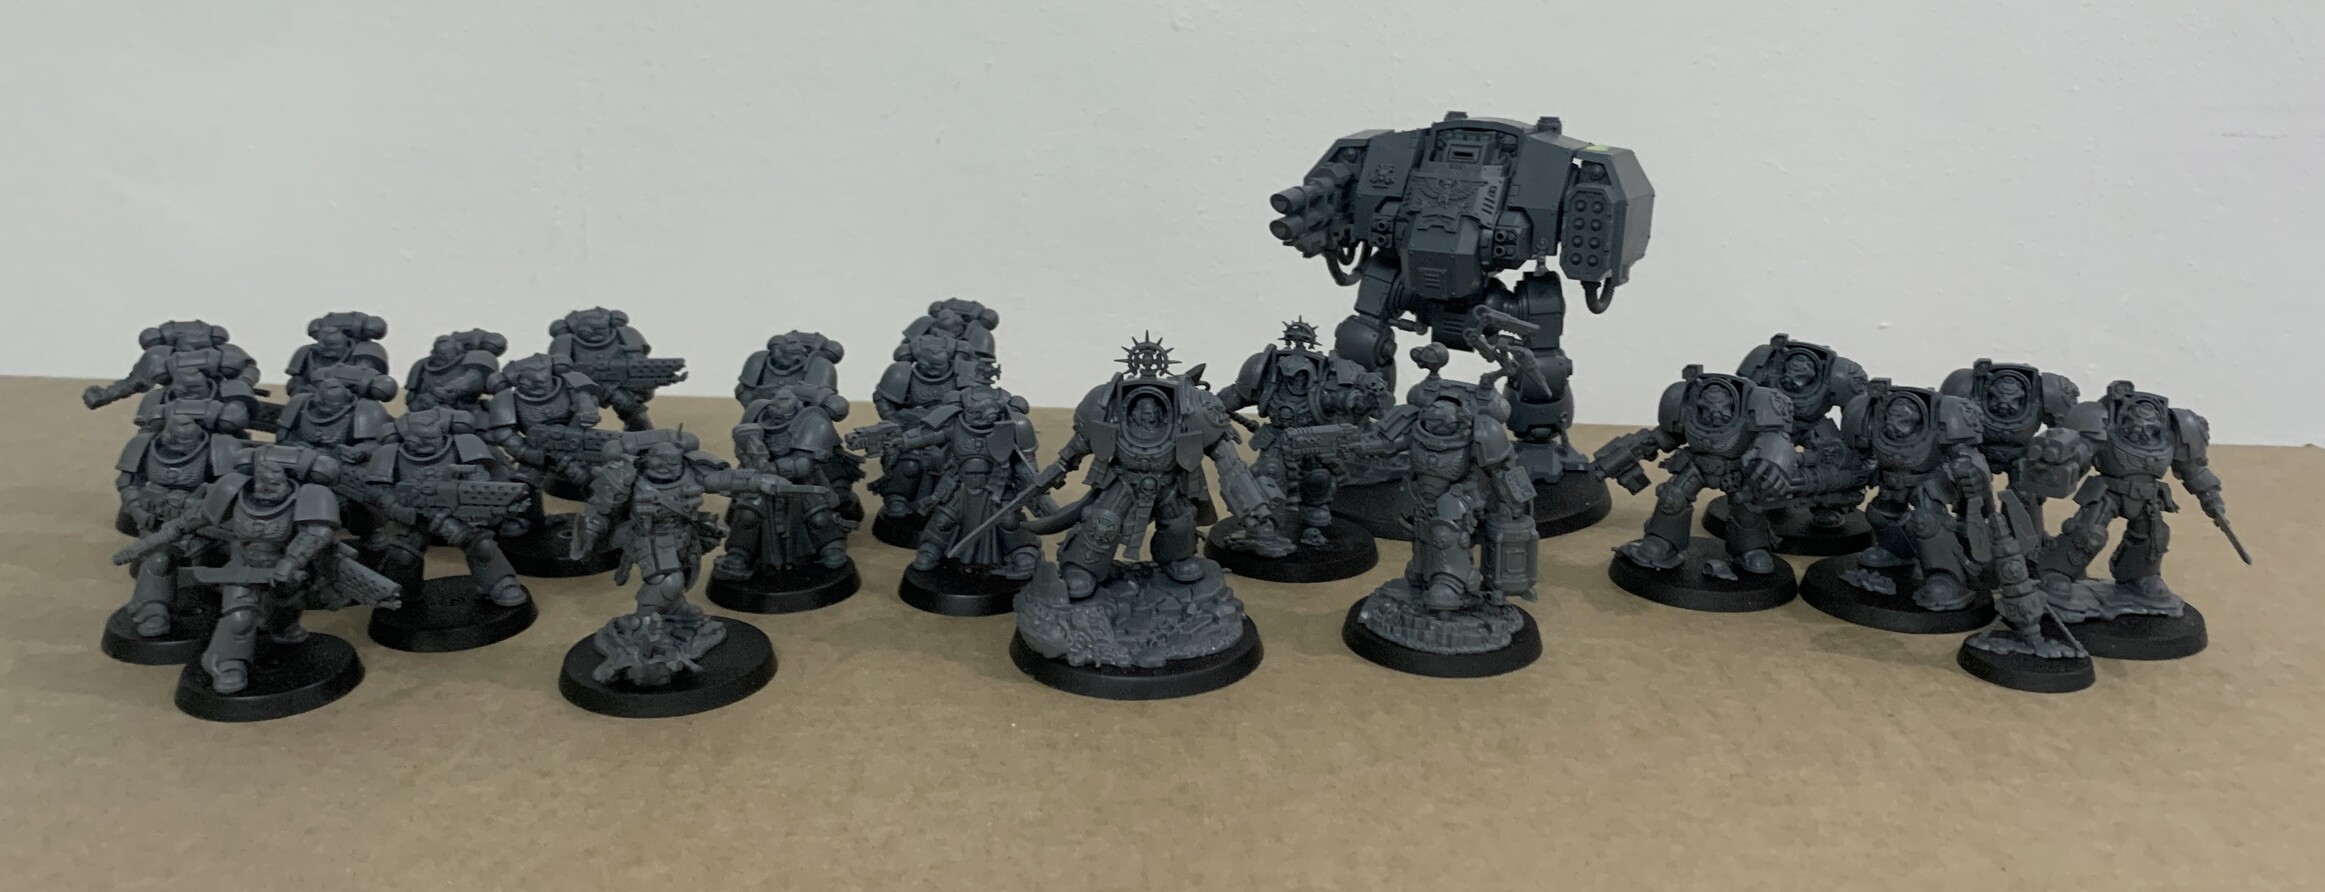 Multiple Space Marines and a dreadnought on a cardboard tray. From left to right are 10 infernos marines, a lieutenant, 5 sternguard veterans, a Captain in terminator armour, a Librarian in terminator armour, a apothacary biologus in gravis armour, a Ballistus dreadnought and 5 terminators with a homing beacon